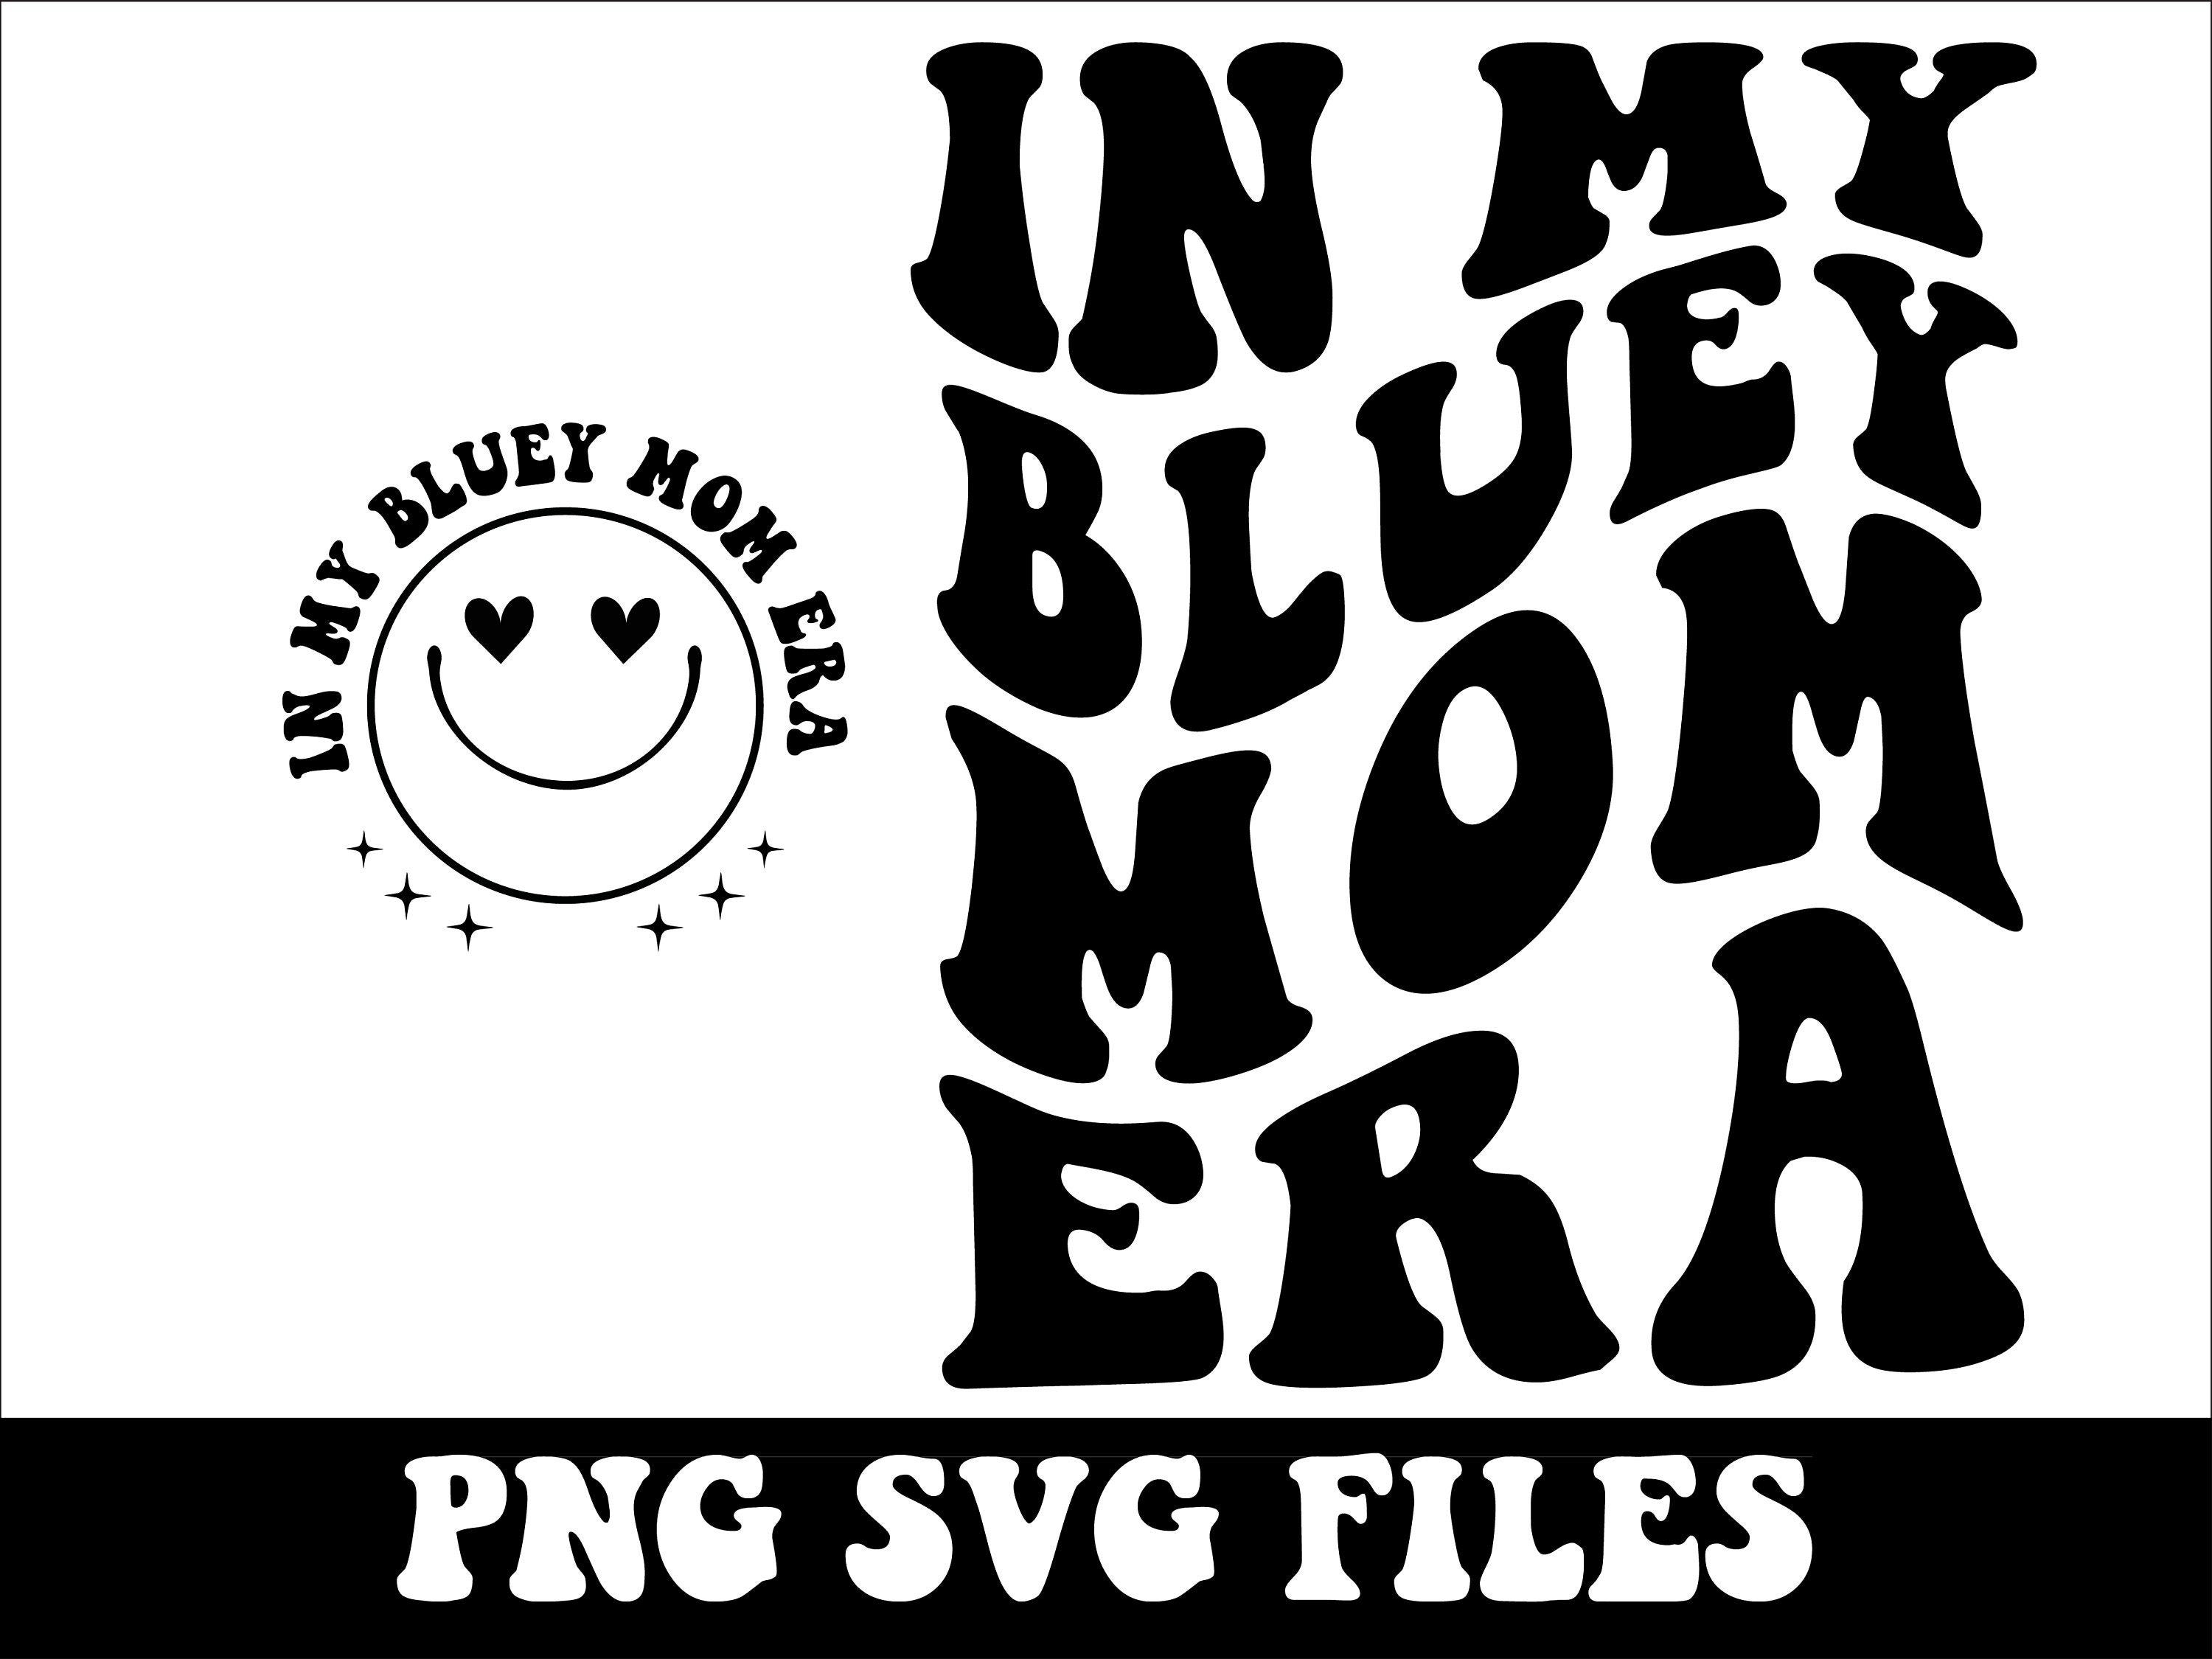 In My Bluey Mom Era SVG, PNG, Dog Mom Svg, Bluey Mom Shirt Png,  Dog Family Png, Retro Wavy Groovy Letters, Cut File Cricut, Silhouette.